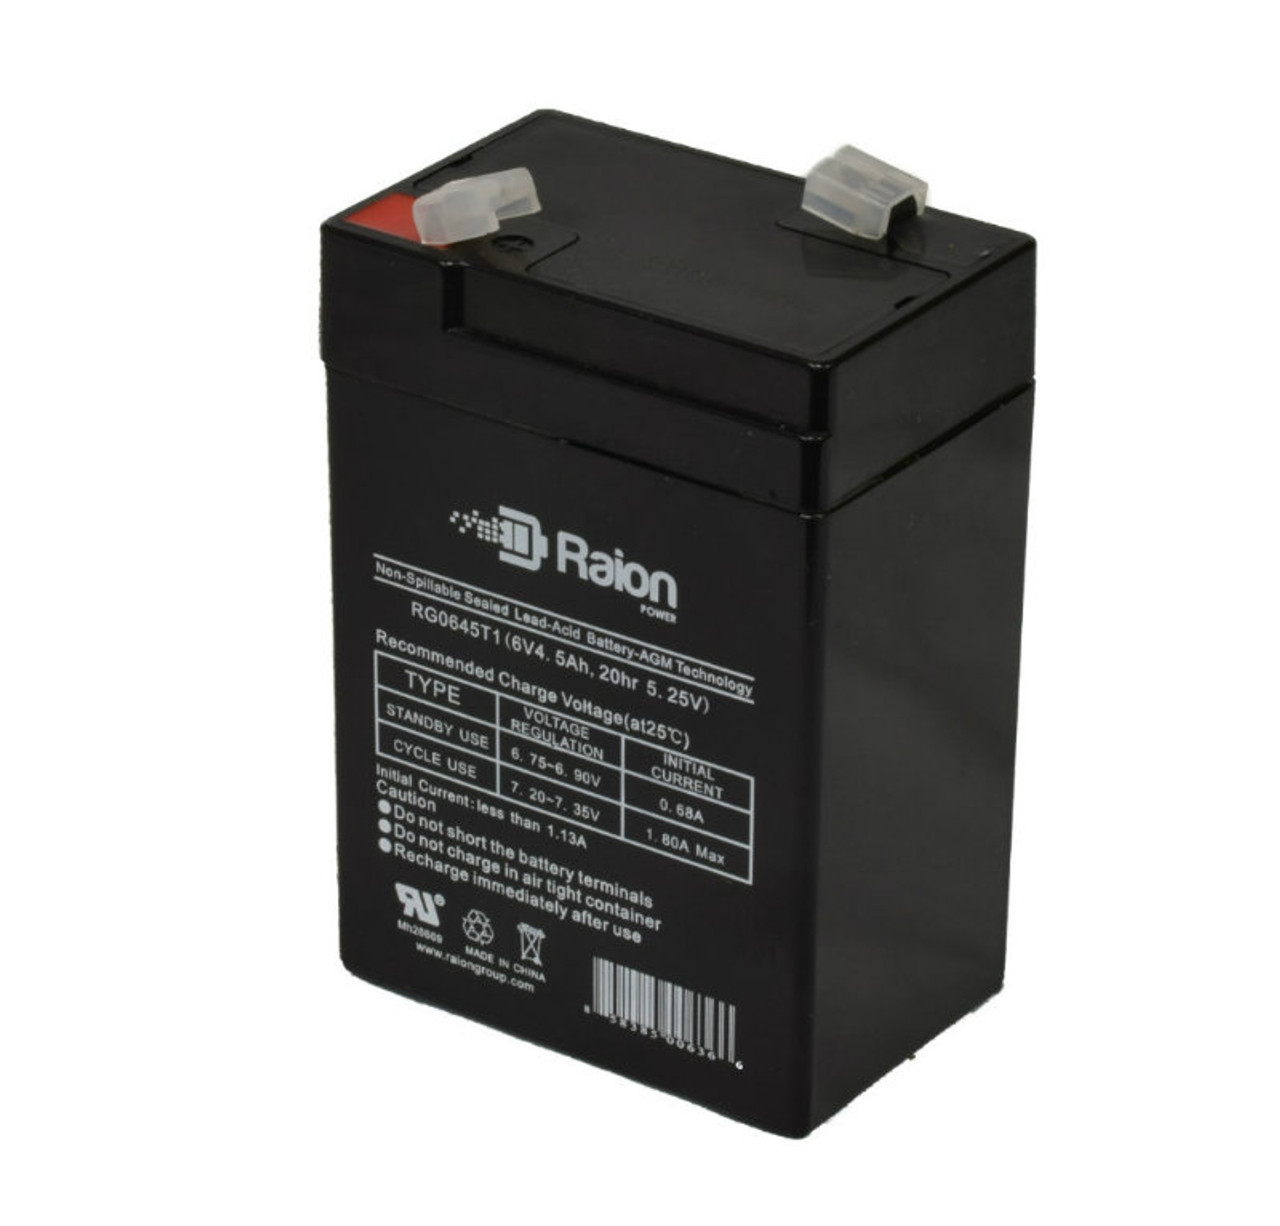 Raion Power RG0645T1 6V 4.5Ah Replacement Battery Cartridge for Sentry Lite PM640